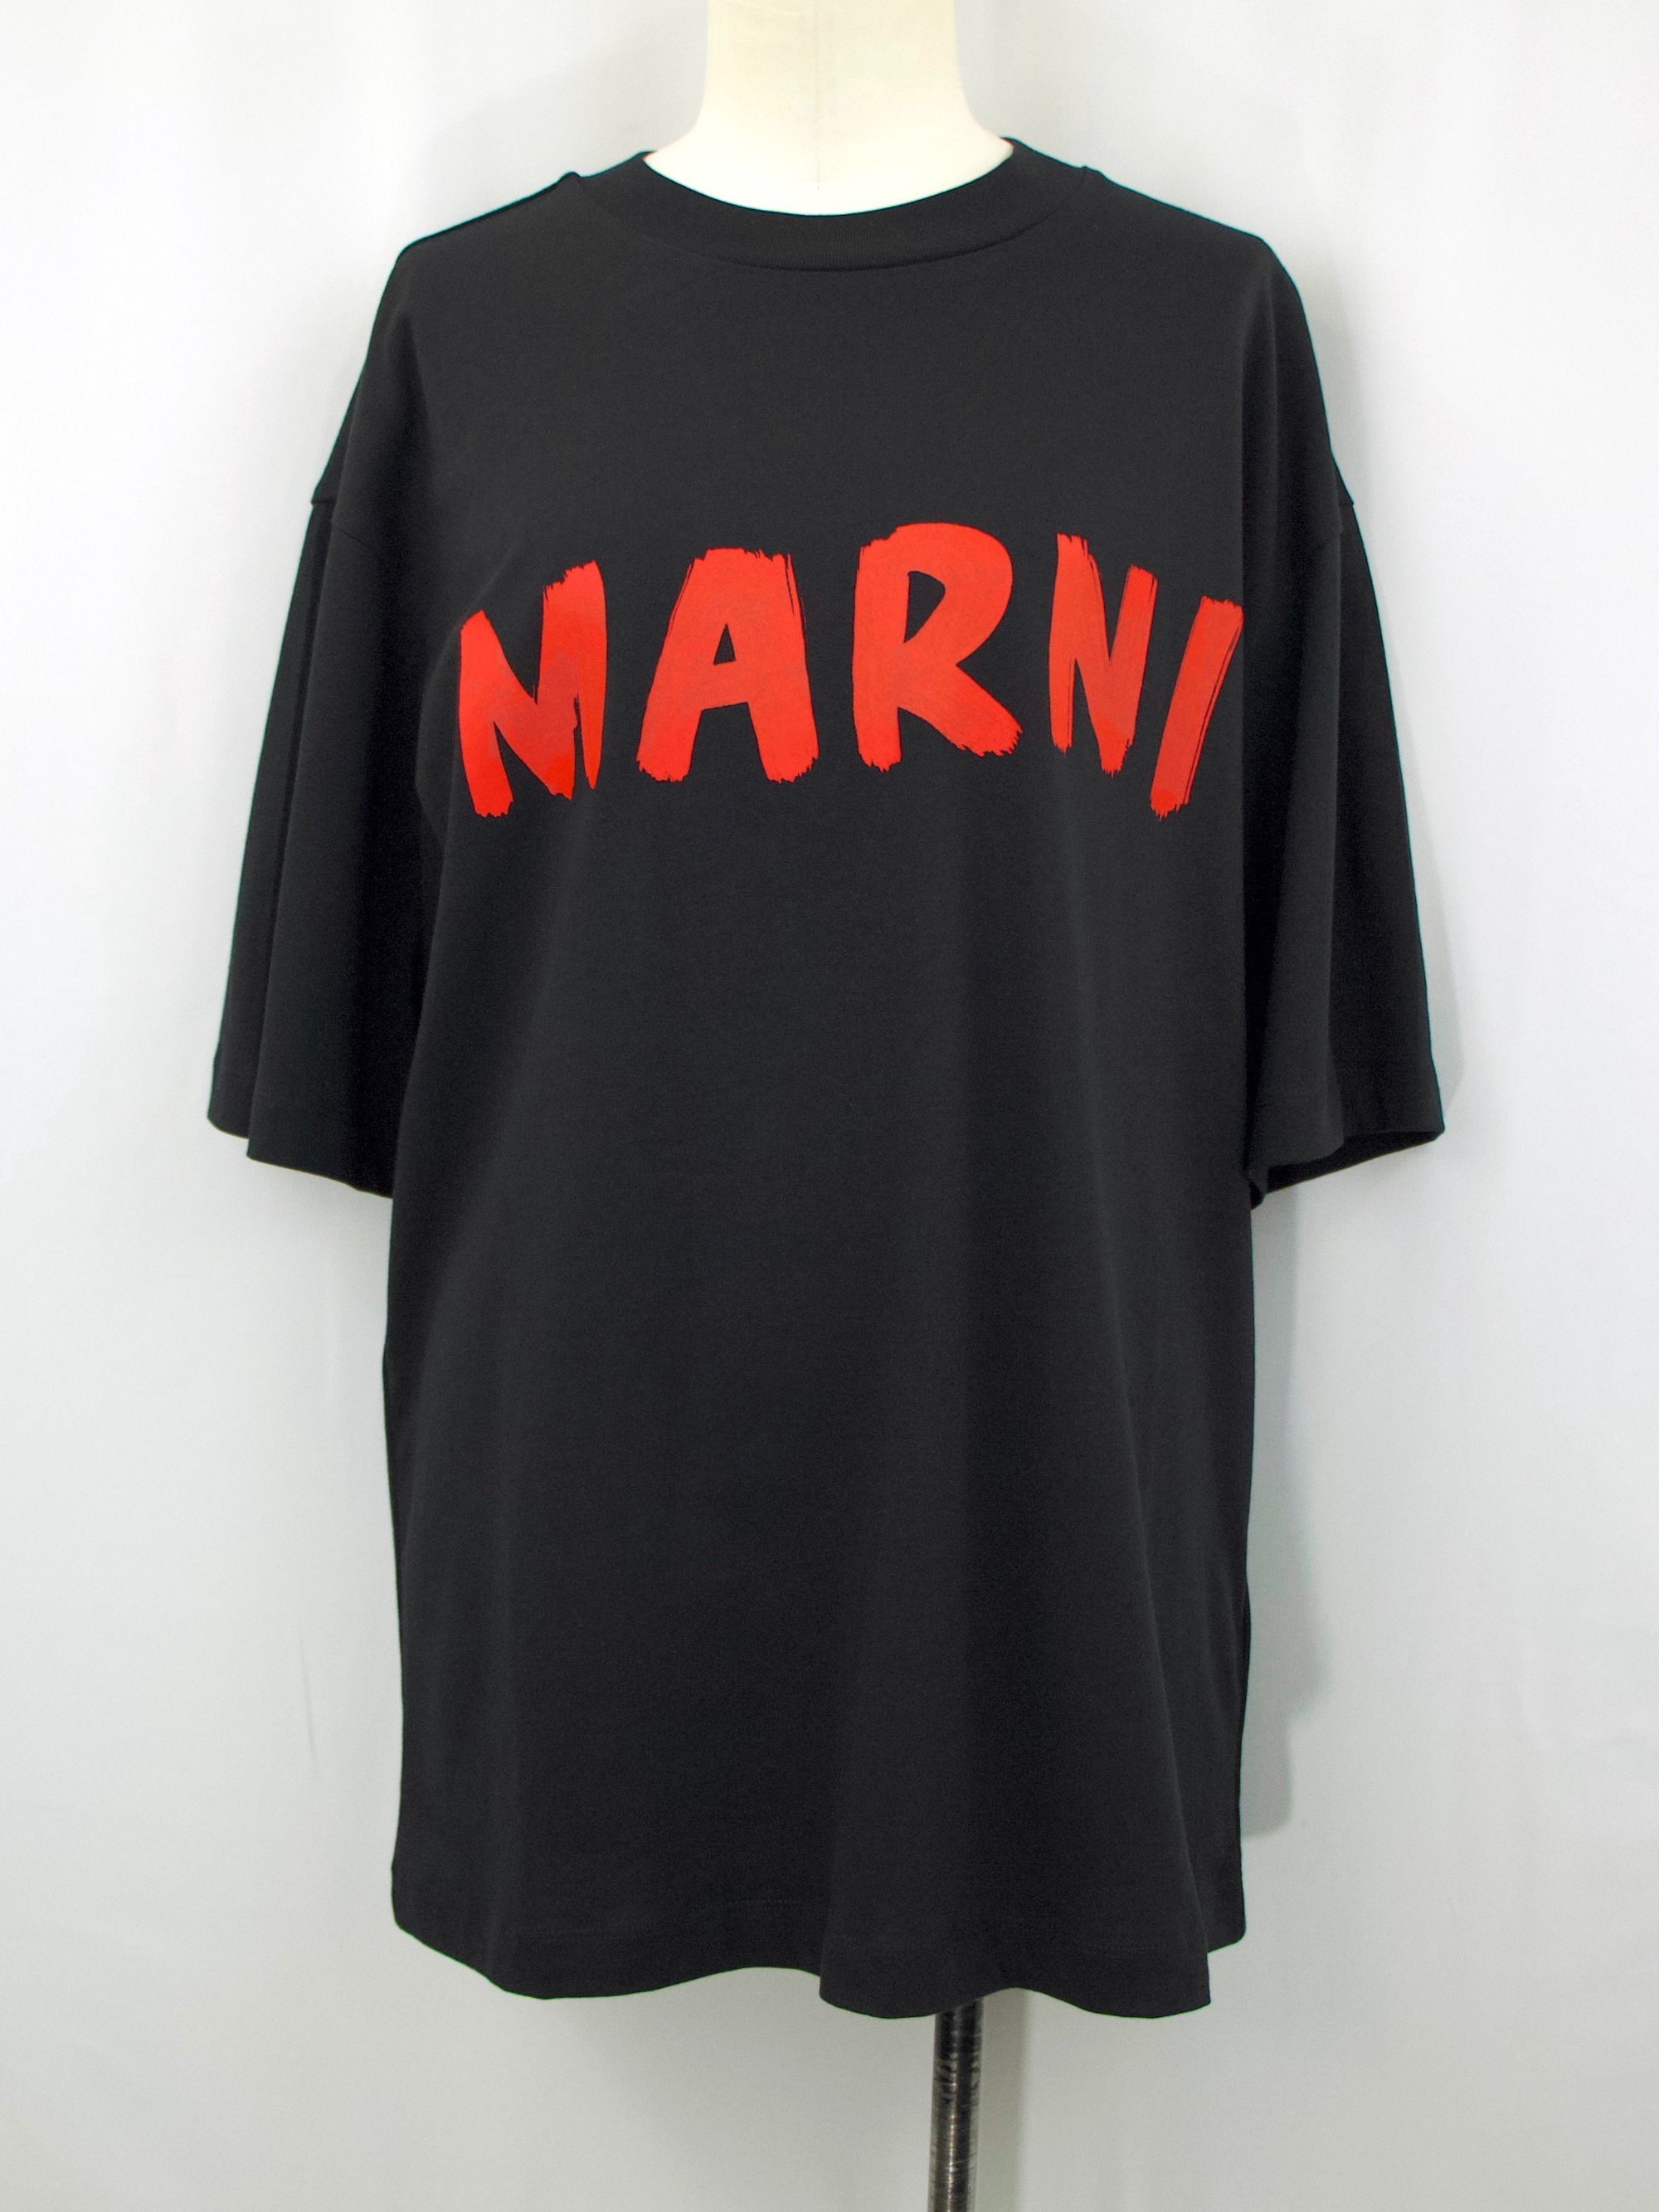 <img class='new_mark_img1' src='https://img.shop-pro.jp/img/new/icons22.gif' style='border:none;display:inline;margin:0px;padding:0px;width:auto;' />【30%OFF】MARNI Logo T-shirt